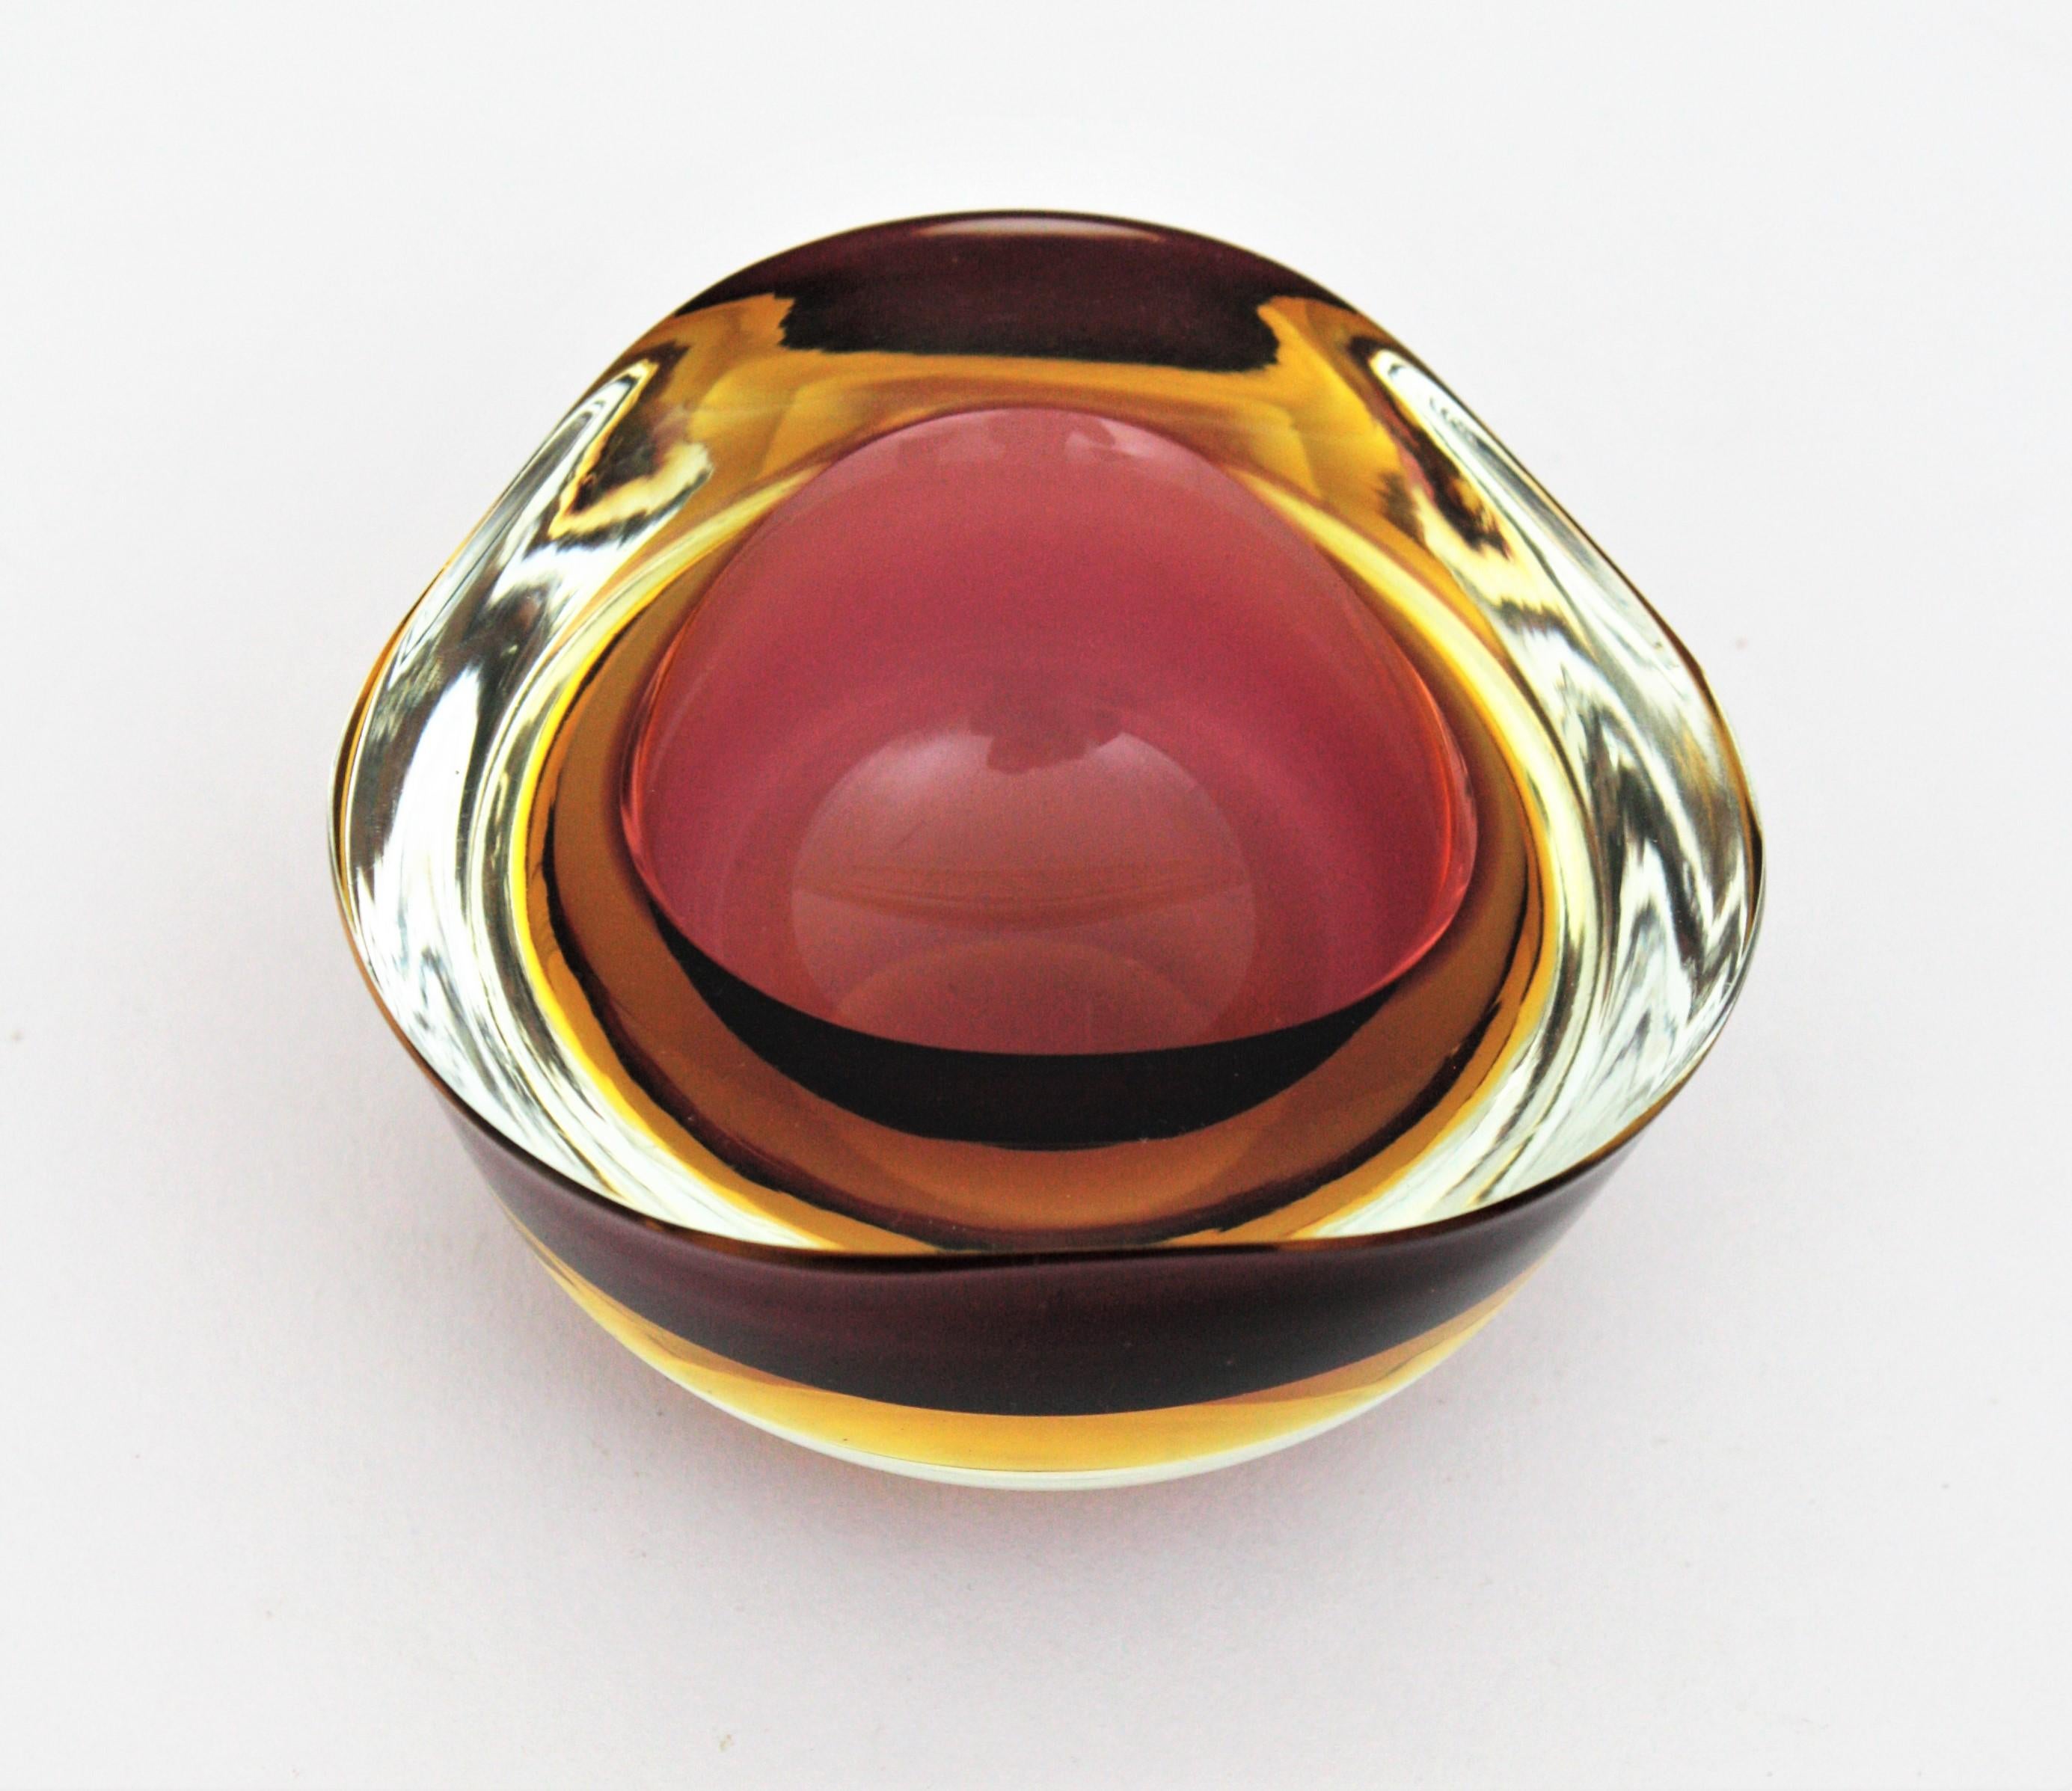 Hand blown Murano glass Sommerso triangle geode bowl in Burgundy and yellow glass submerged into clear glass. Manufactured by Seguso. Italy, 1960s.
A highly decorative small bowl lovely to be used as rings bowl, decorative bowl or small ashtray.